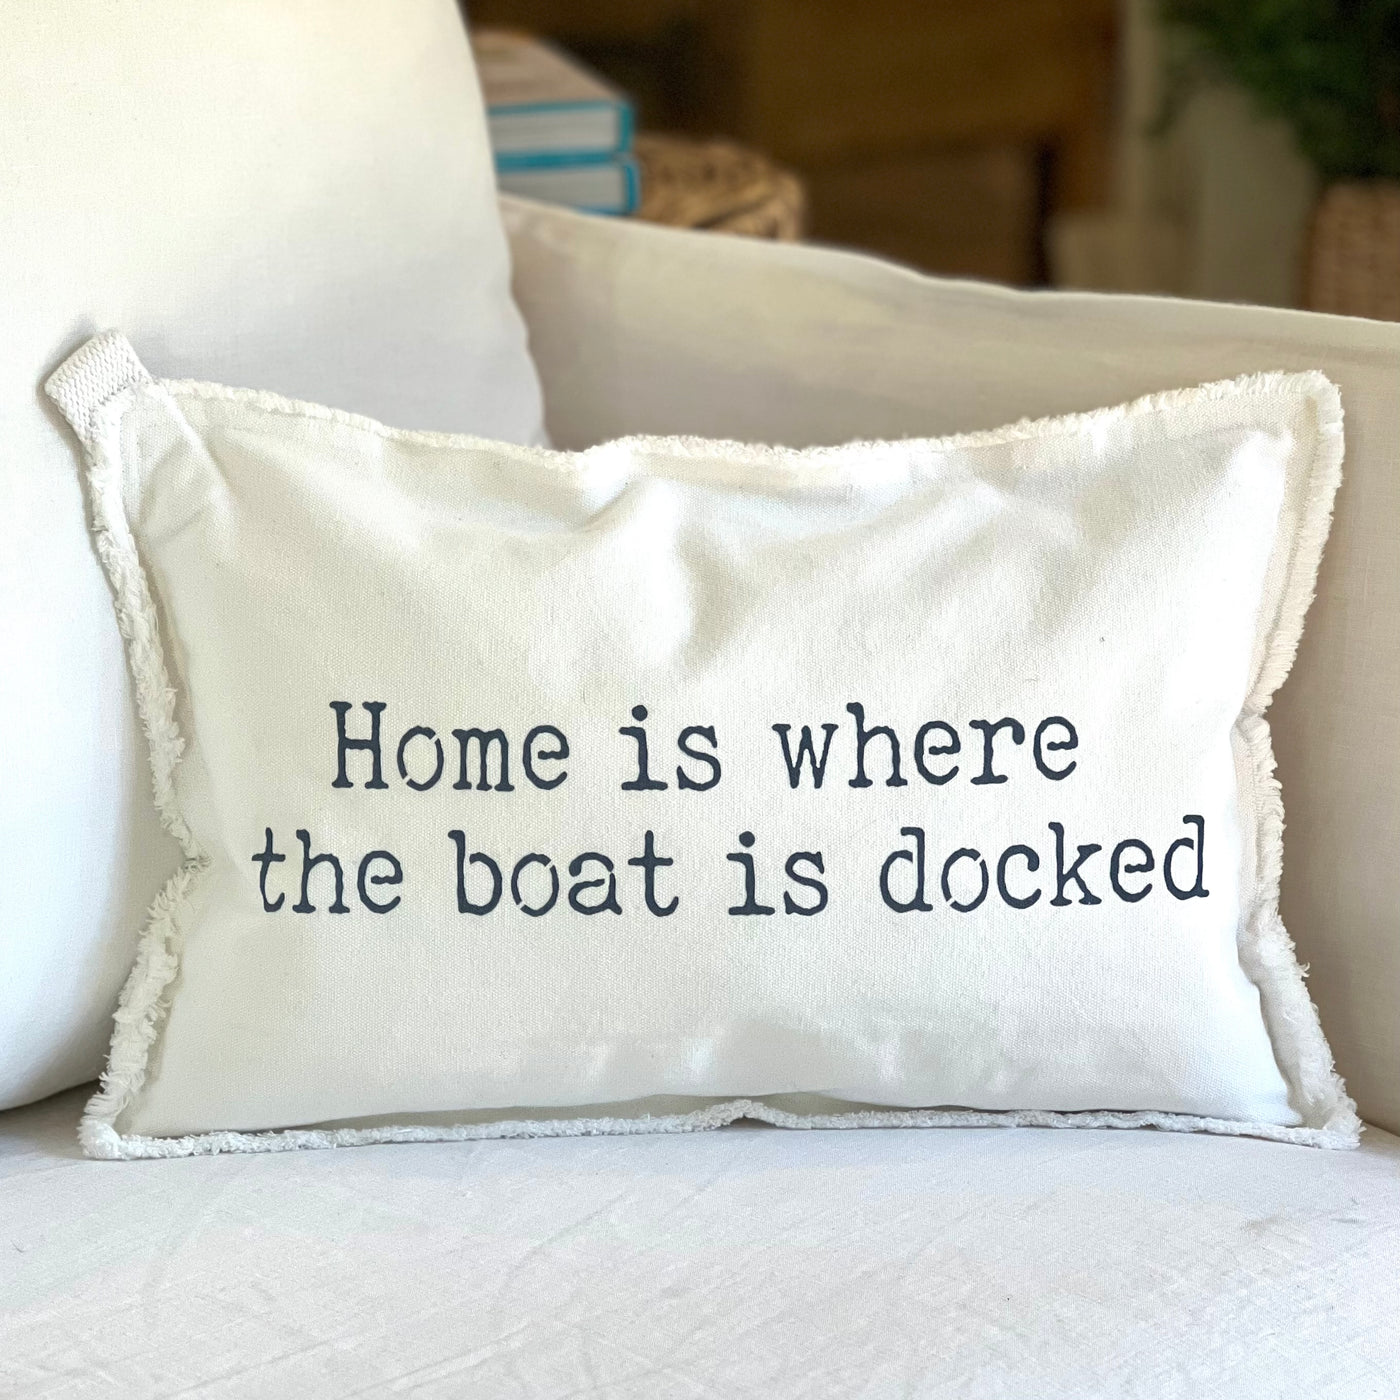 home is where the boat is docked pillow